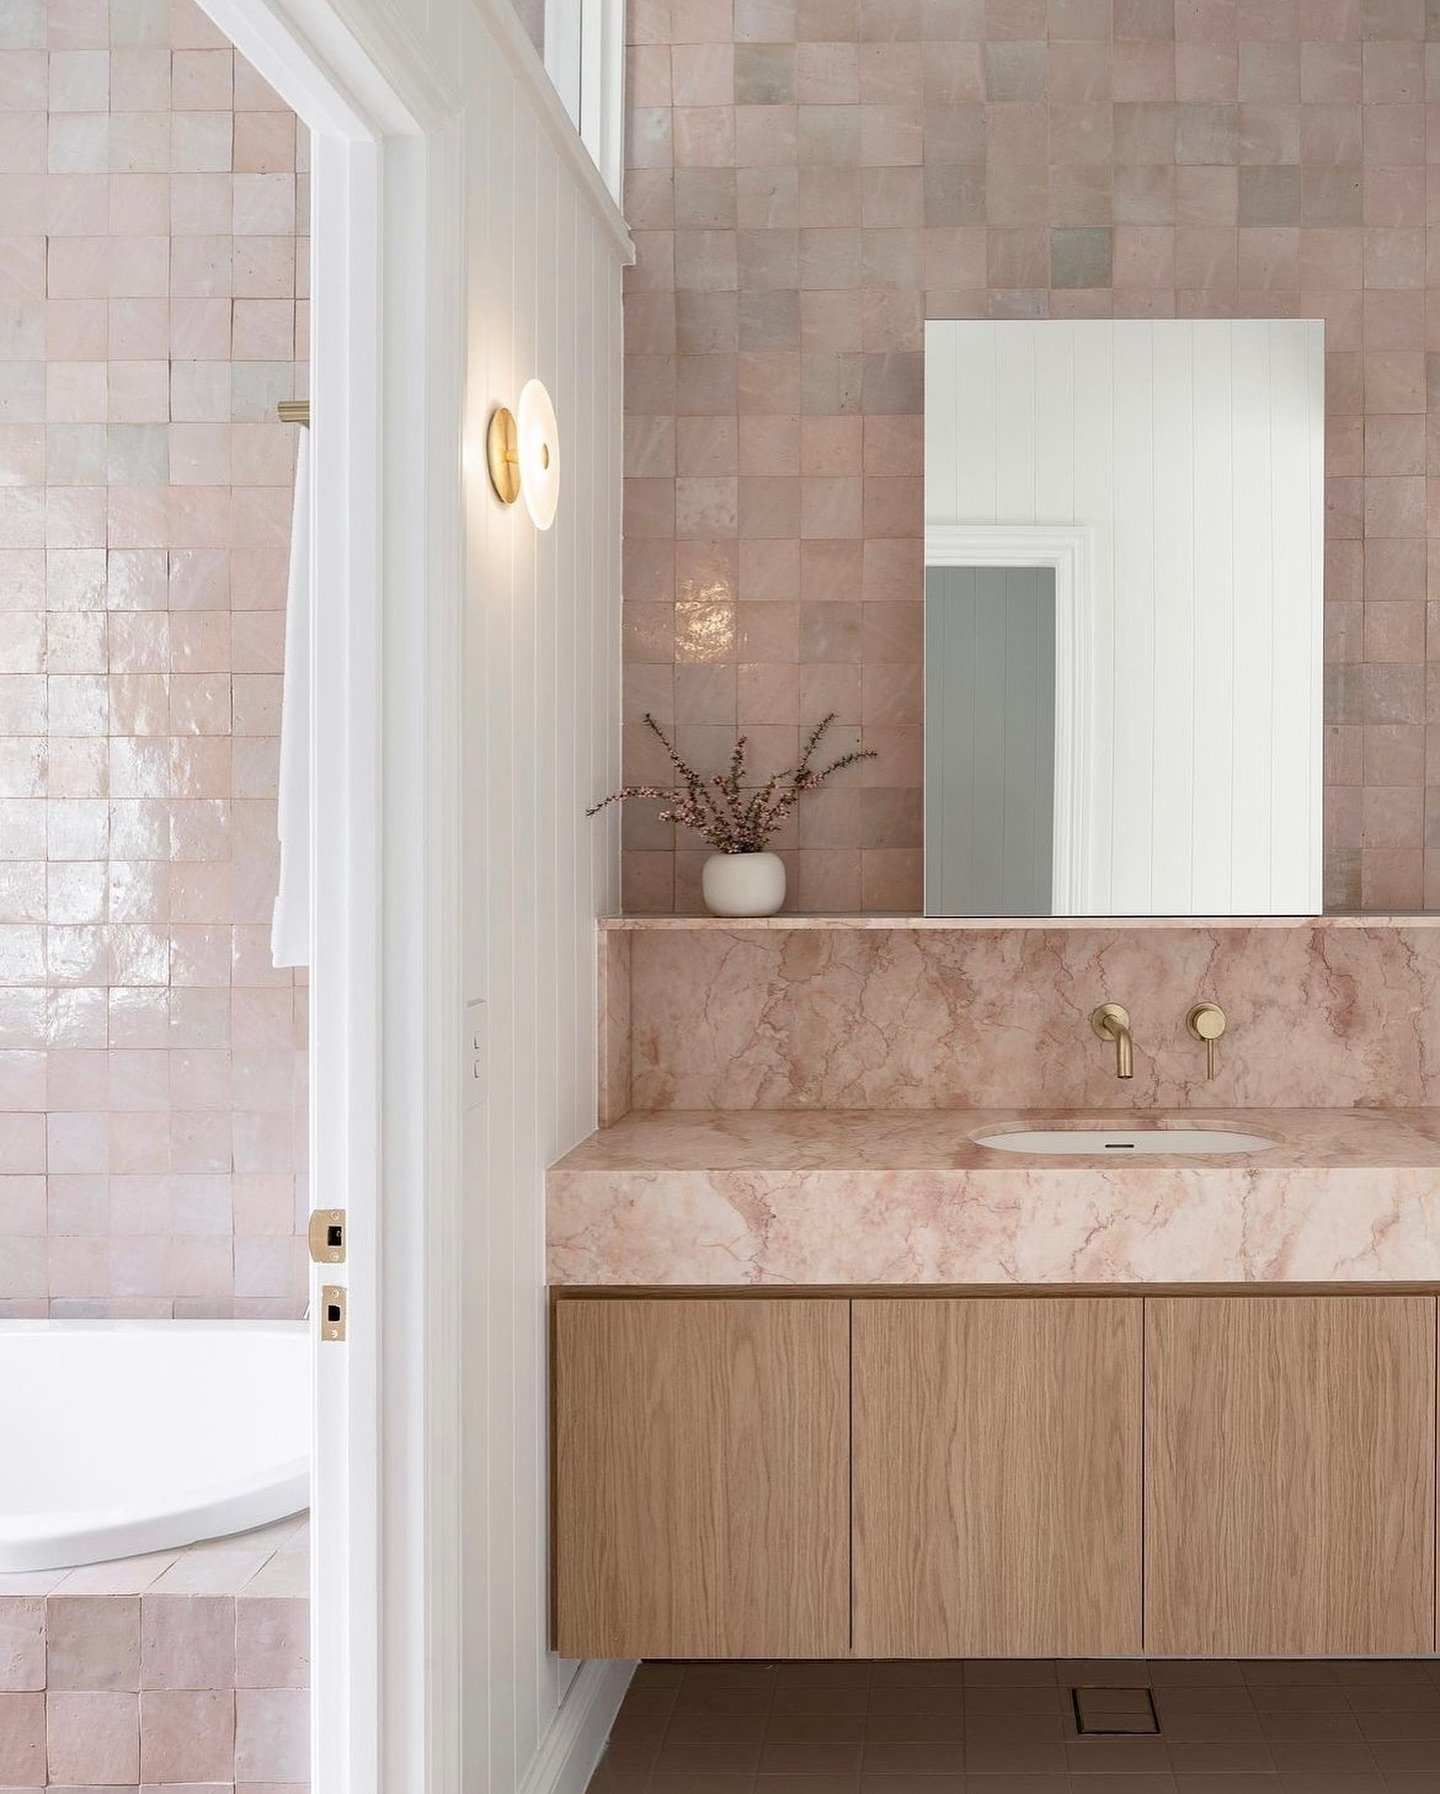 a warm and inviting bathroom on a rainy day. Beautifully captured by @tari.c.peterson for @abiinteriors and @abiinteriors_uk 

We love the way this image captured the glow of the @soktas wall light as it highlights the tones and textures of the zelli